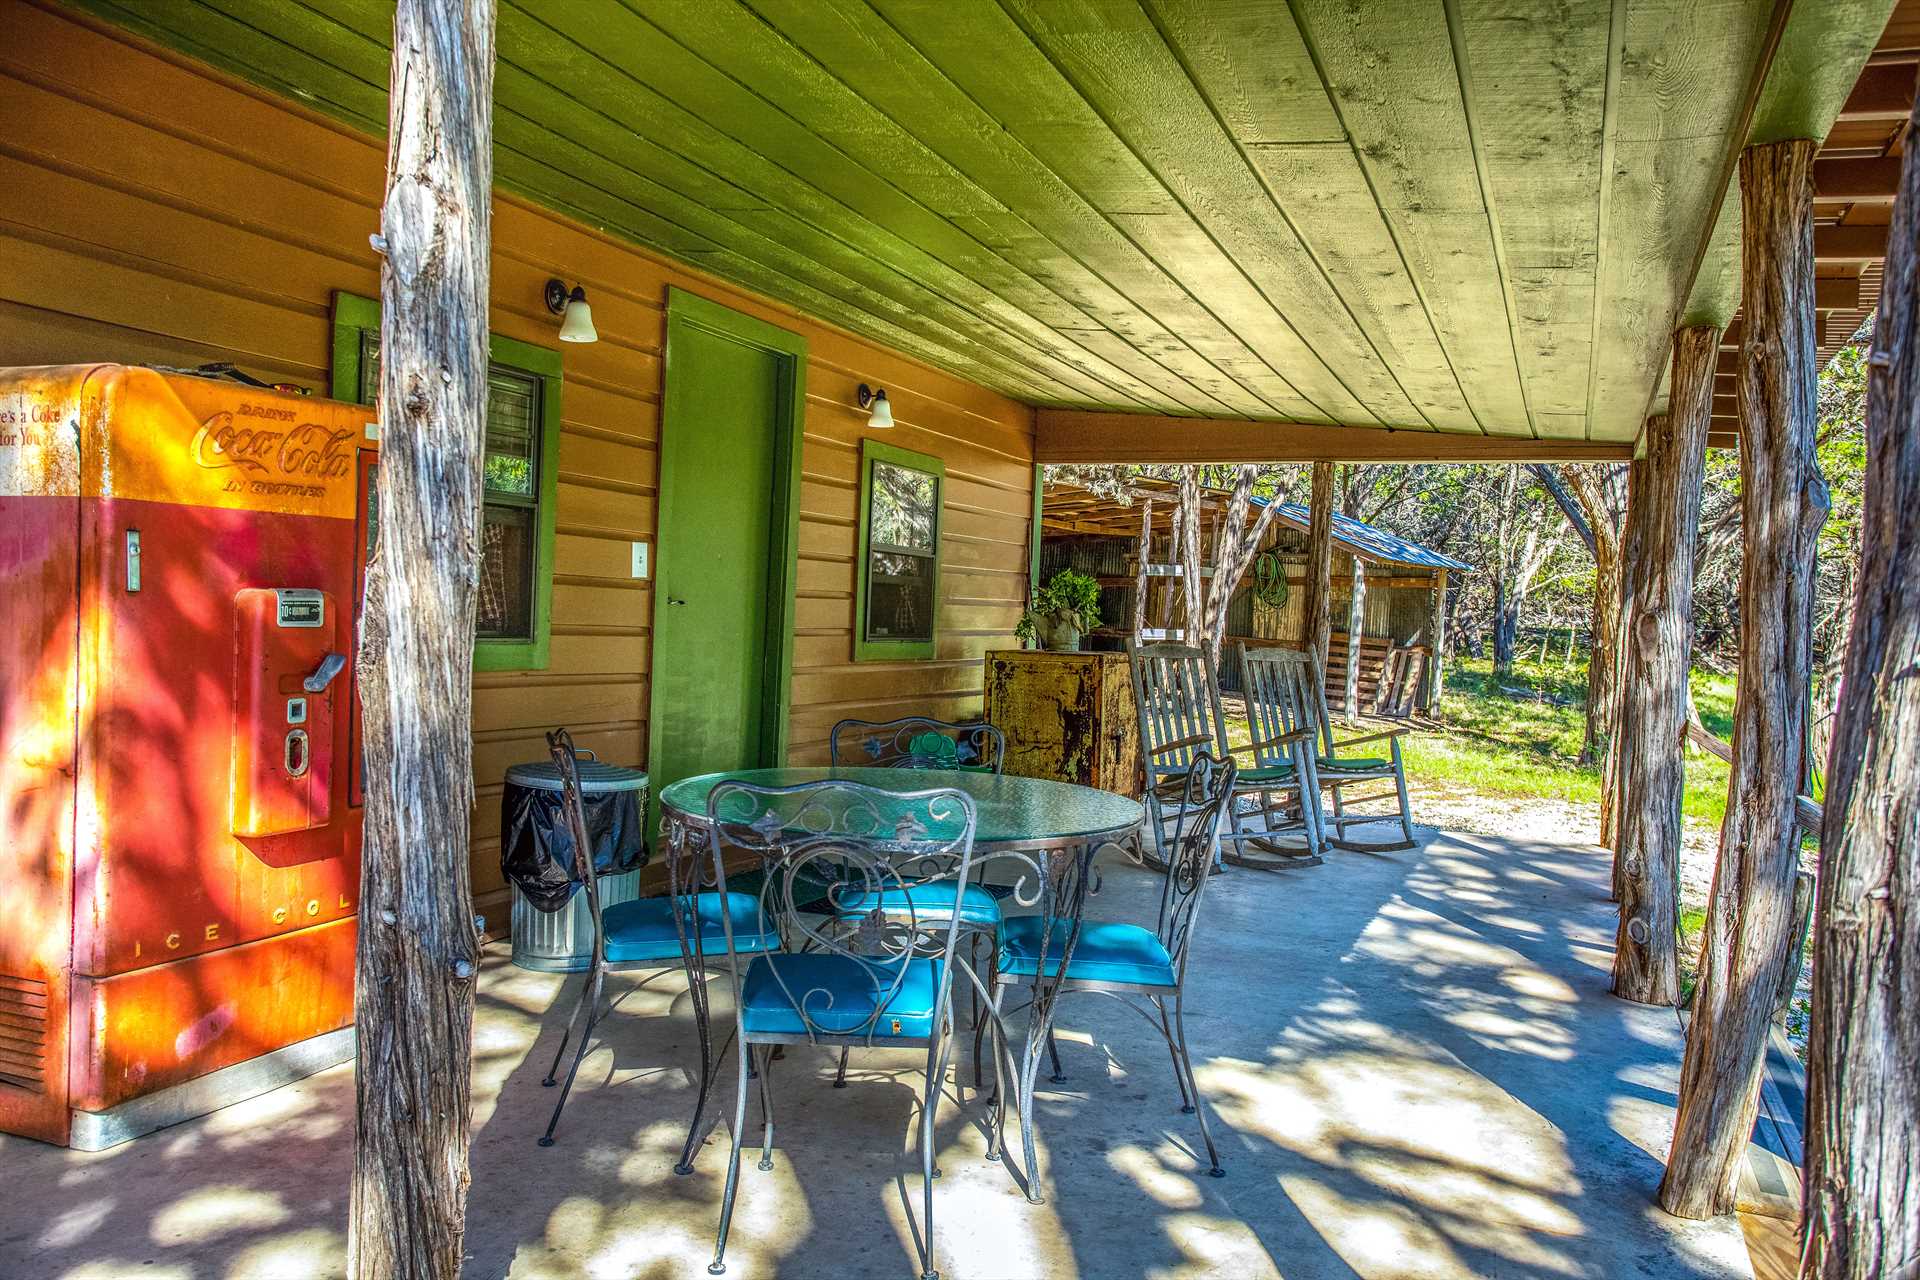                                                 Savor the peace of the surrounding Hill Country in the shaded comfort of the porch, complete with plenty of outdoor furniture.